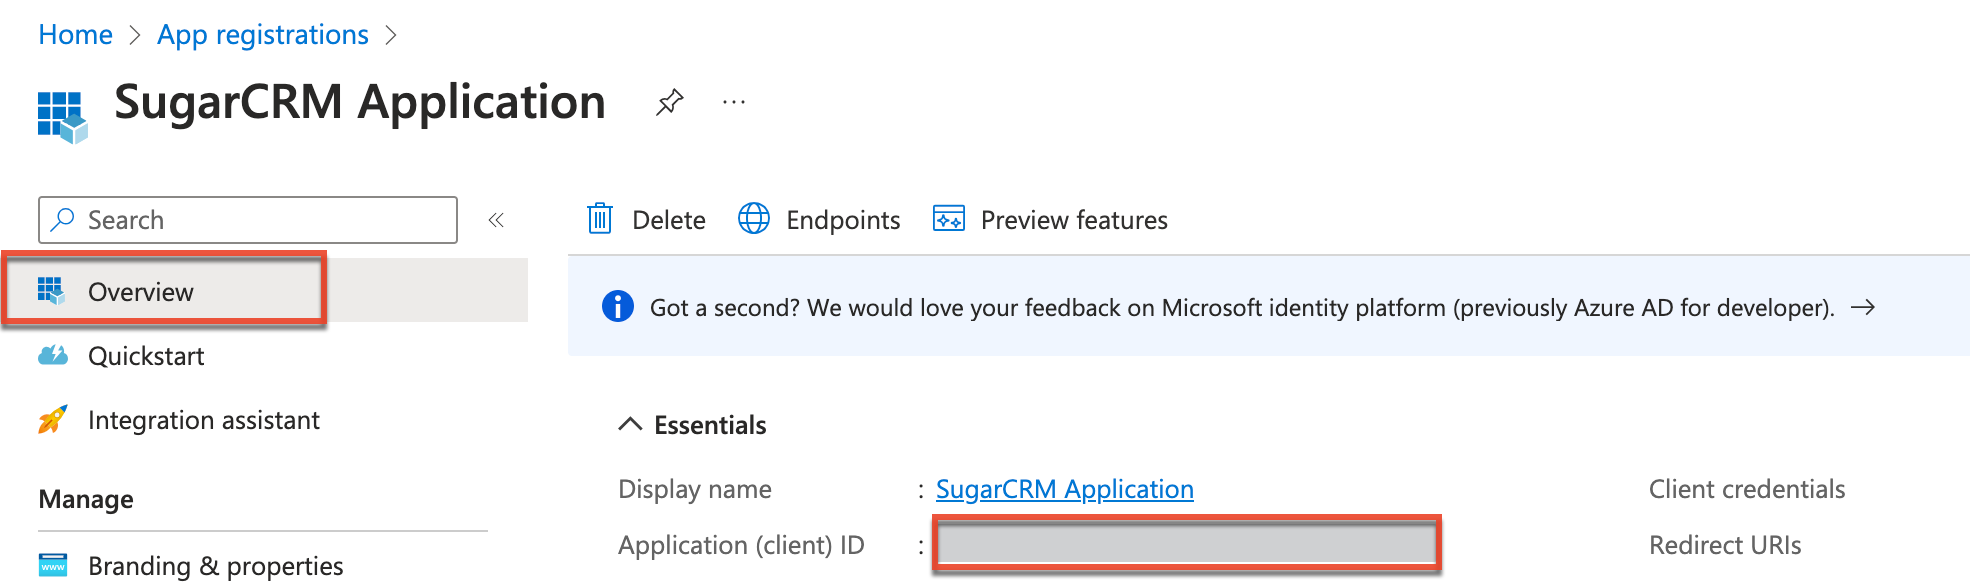 IntegratingWithMicrosoftConnectorForAdmins_ClientID